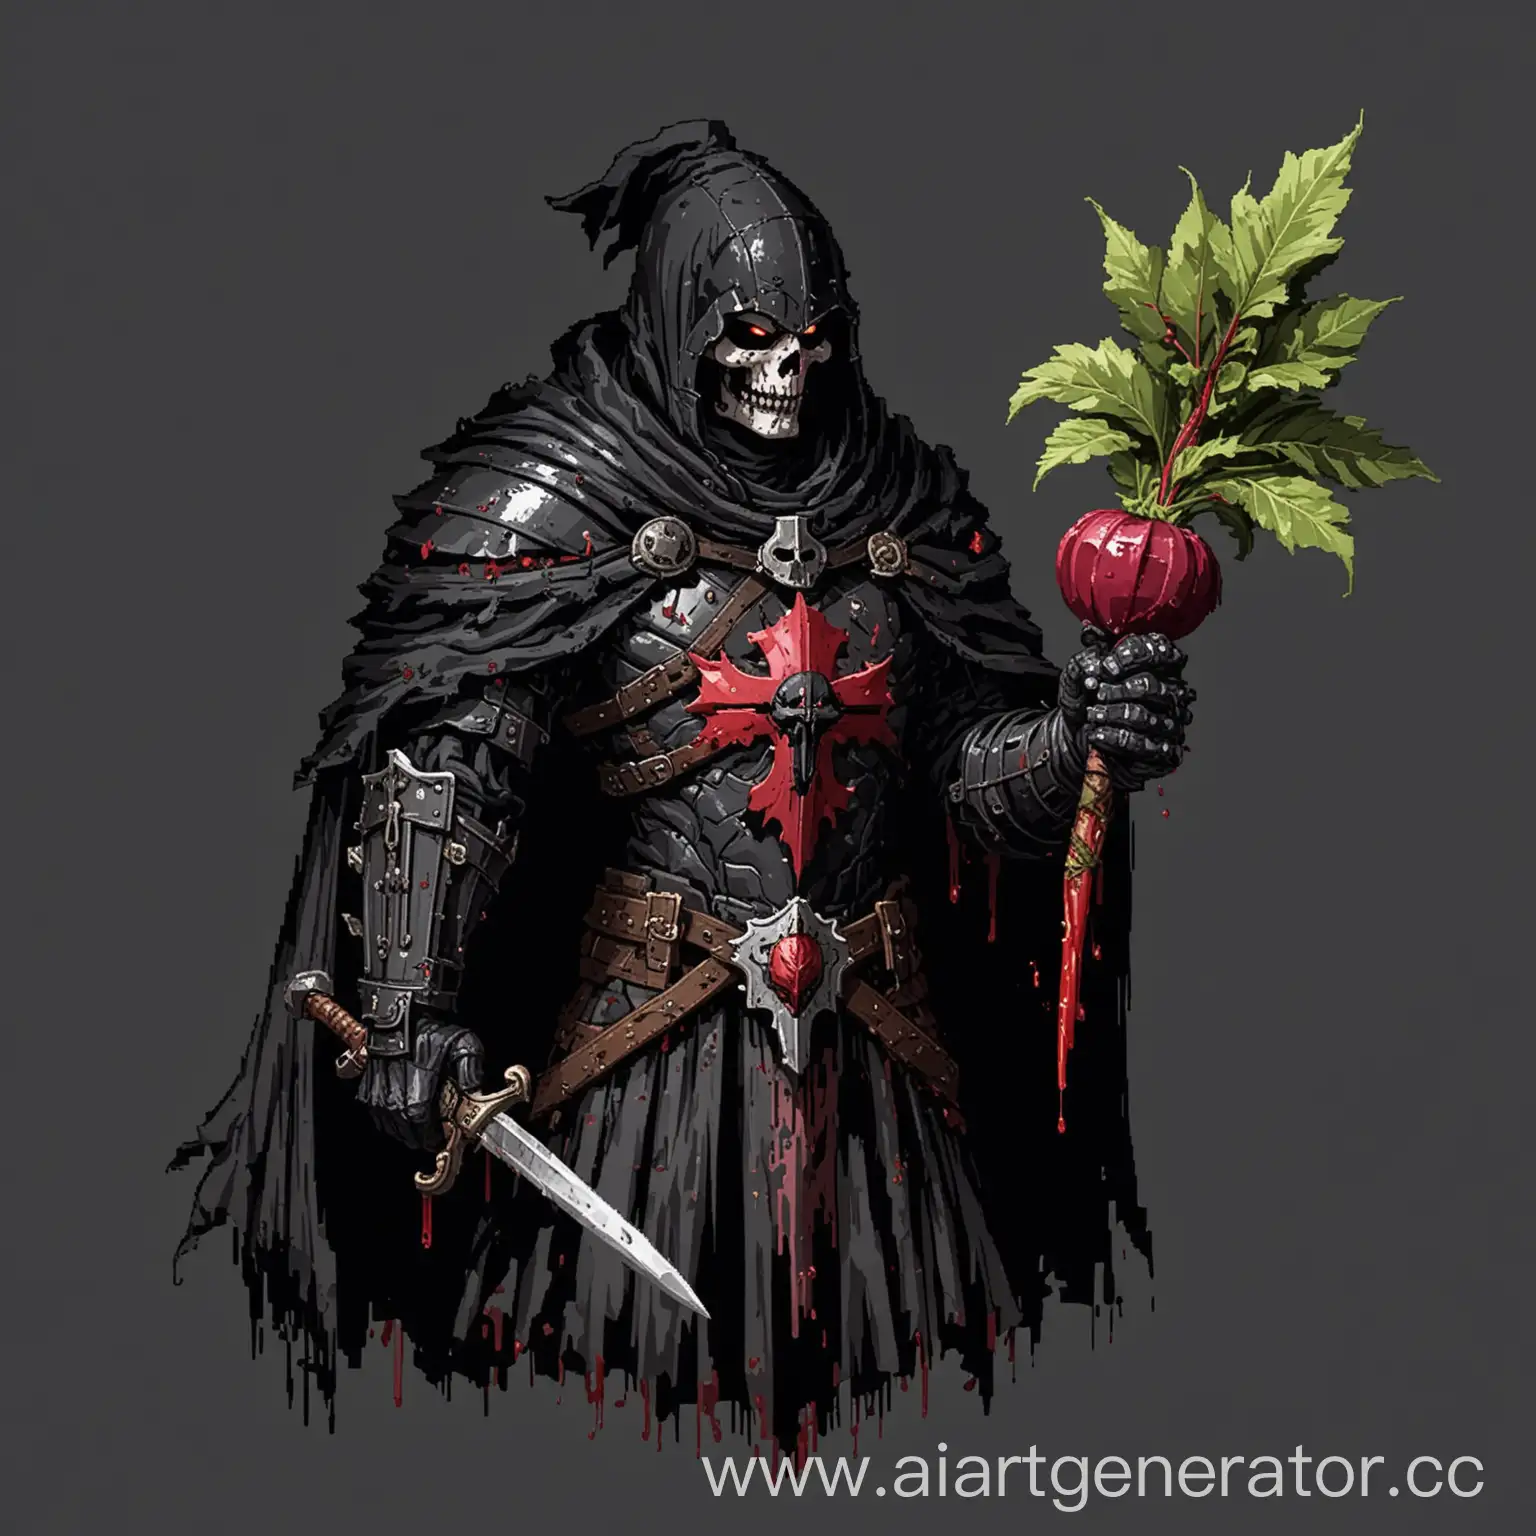 Grim-Knight-with-Beetroot-Heraldry-and-Bloodied-Sword